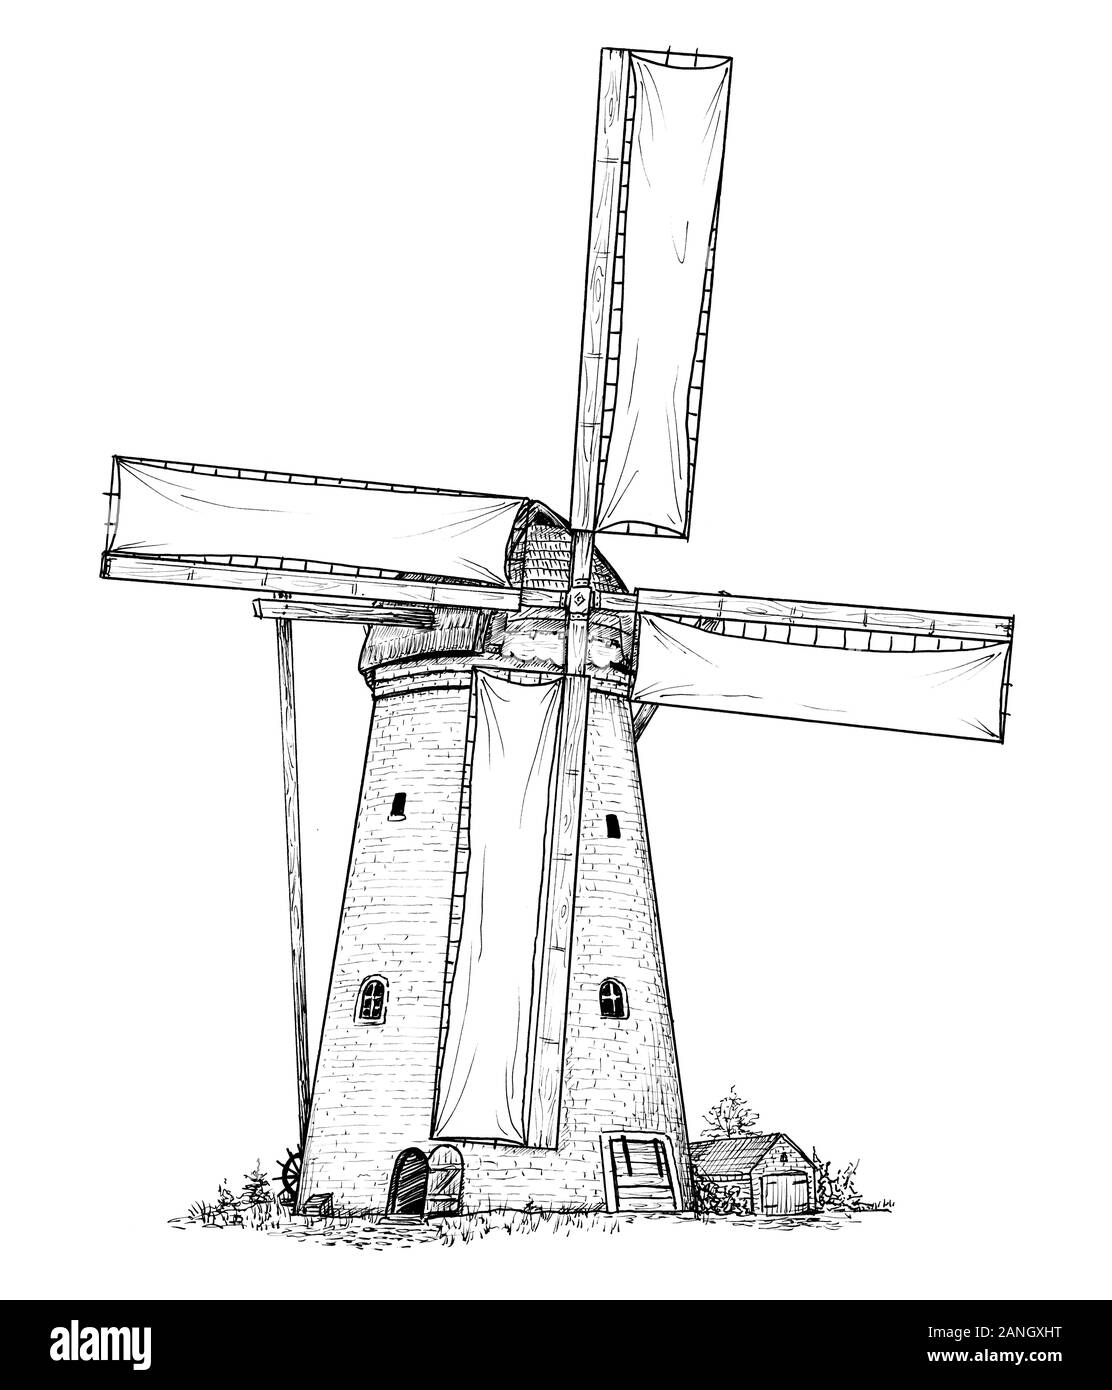 Drawing of classic windmill. Sketch of the Netherlands architecture, black and white illustration Stock Photo